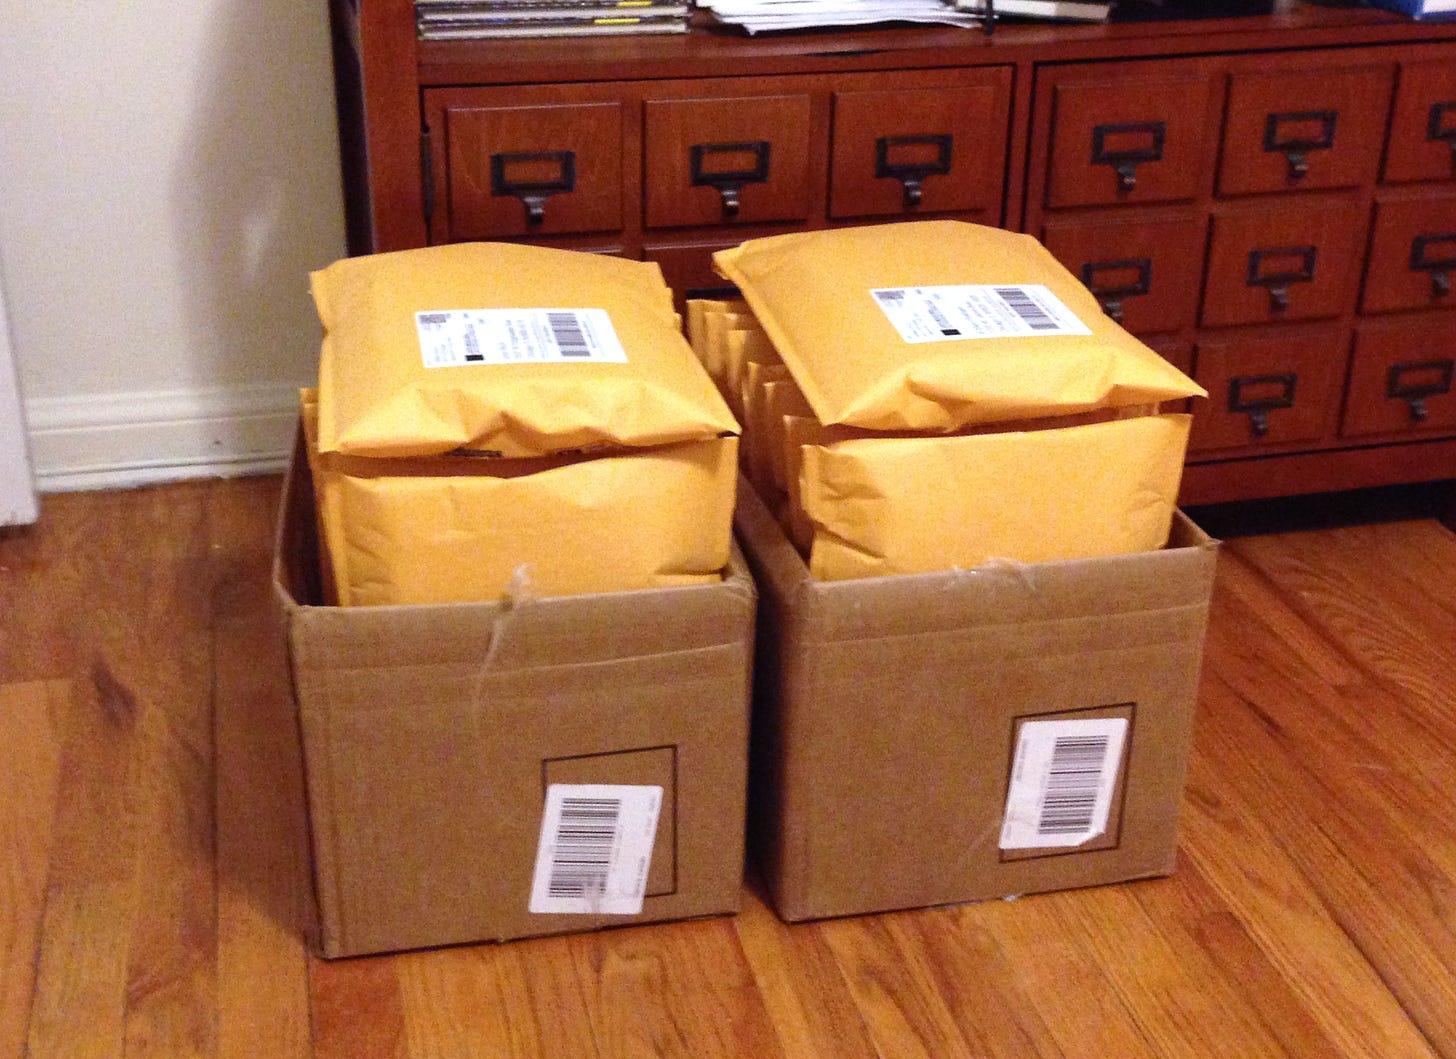 Two cardboard boxes filled with padded yellow book mailers stamped and ready to ship sit on a hardwood before an apothecary-style cabinet.